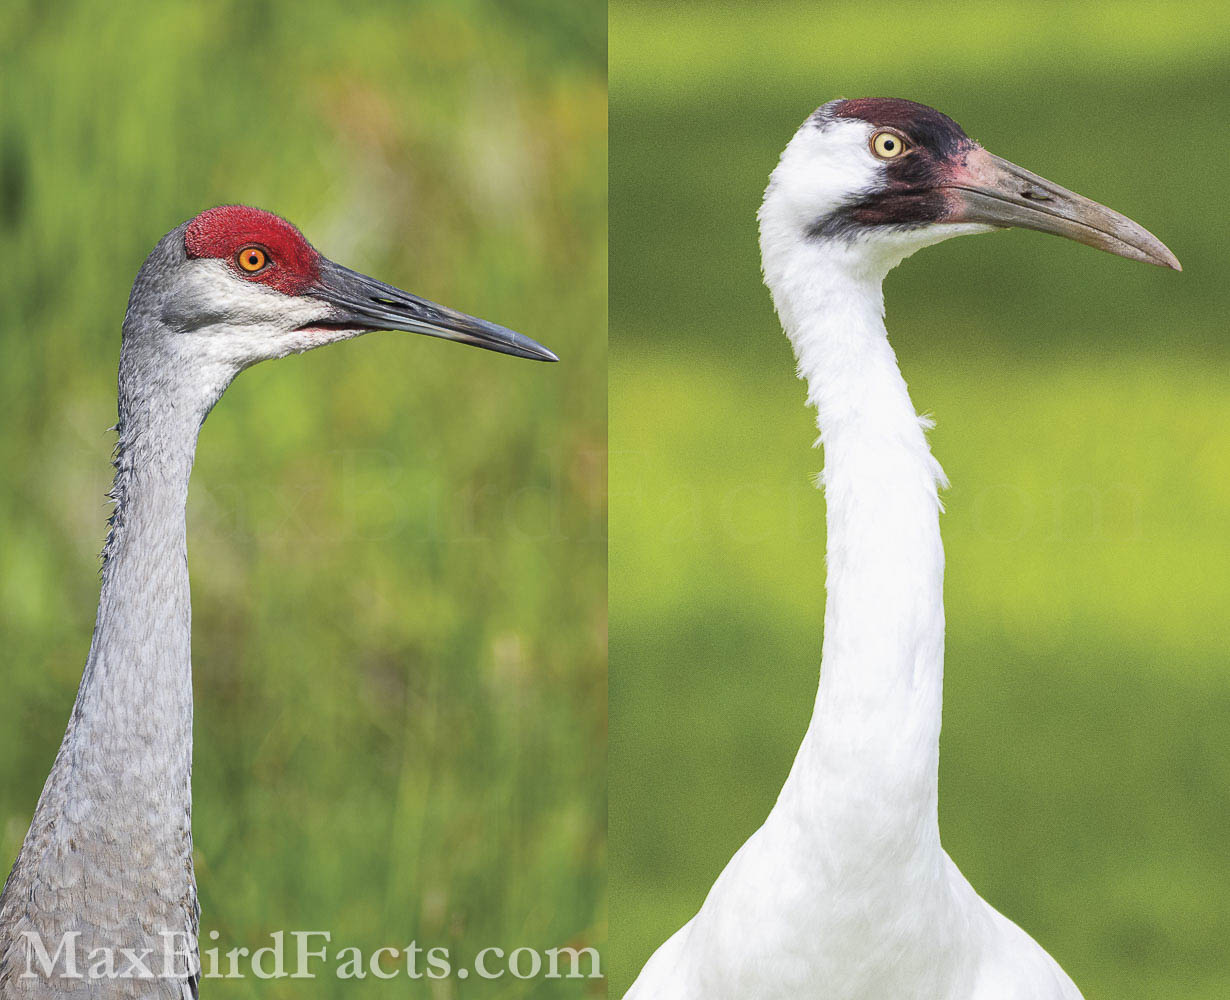 Whooping_Crane_vs_Sandhill_Crane_Whooping-Crane-vs-Sandhill-Crane-Profile
I’ve tried to scale the images of this Sandhill Crane and Whooping Crane to be roughly accurate to how they would appear side-by-side. Note the color difference between the birds' beaks and the flesh at their base. Also, see the white cheeks and throat of the Sandhill compared to the exposed flesh along the lower jaw of the Whooping. (Christmas, FL. 2020) (Leesburg, FL. 2022)